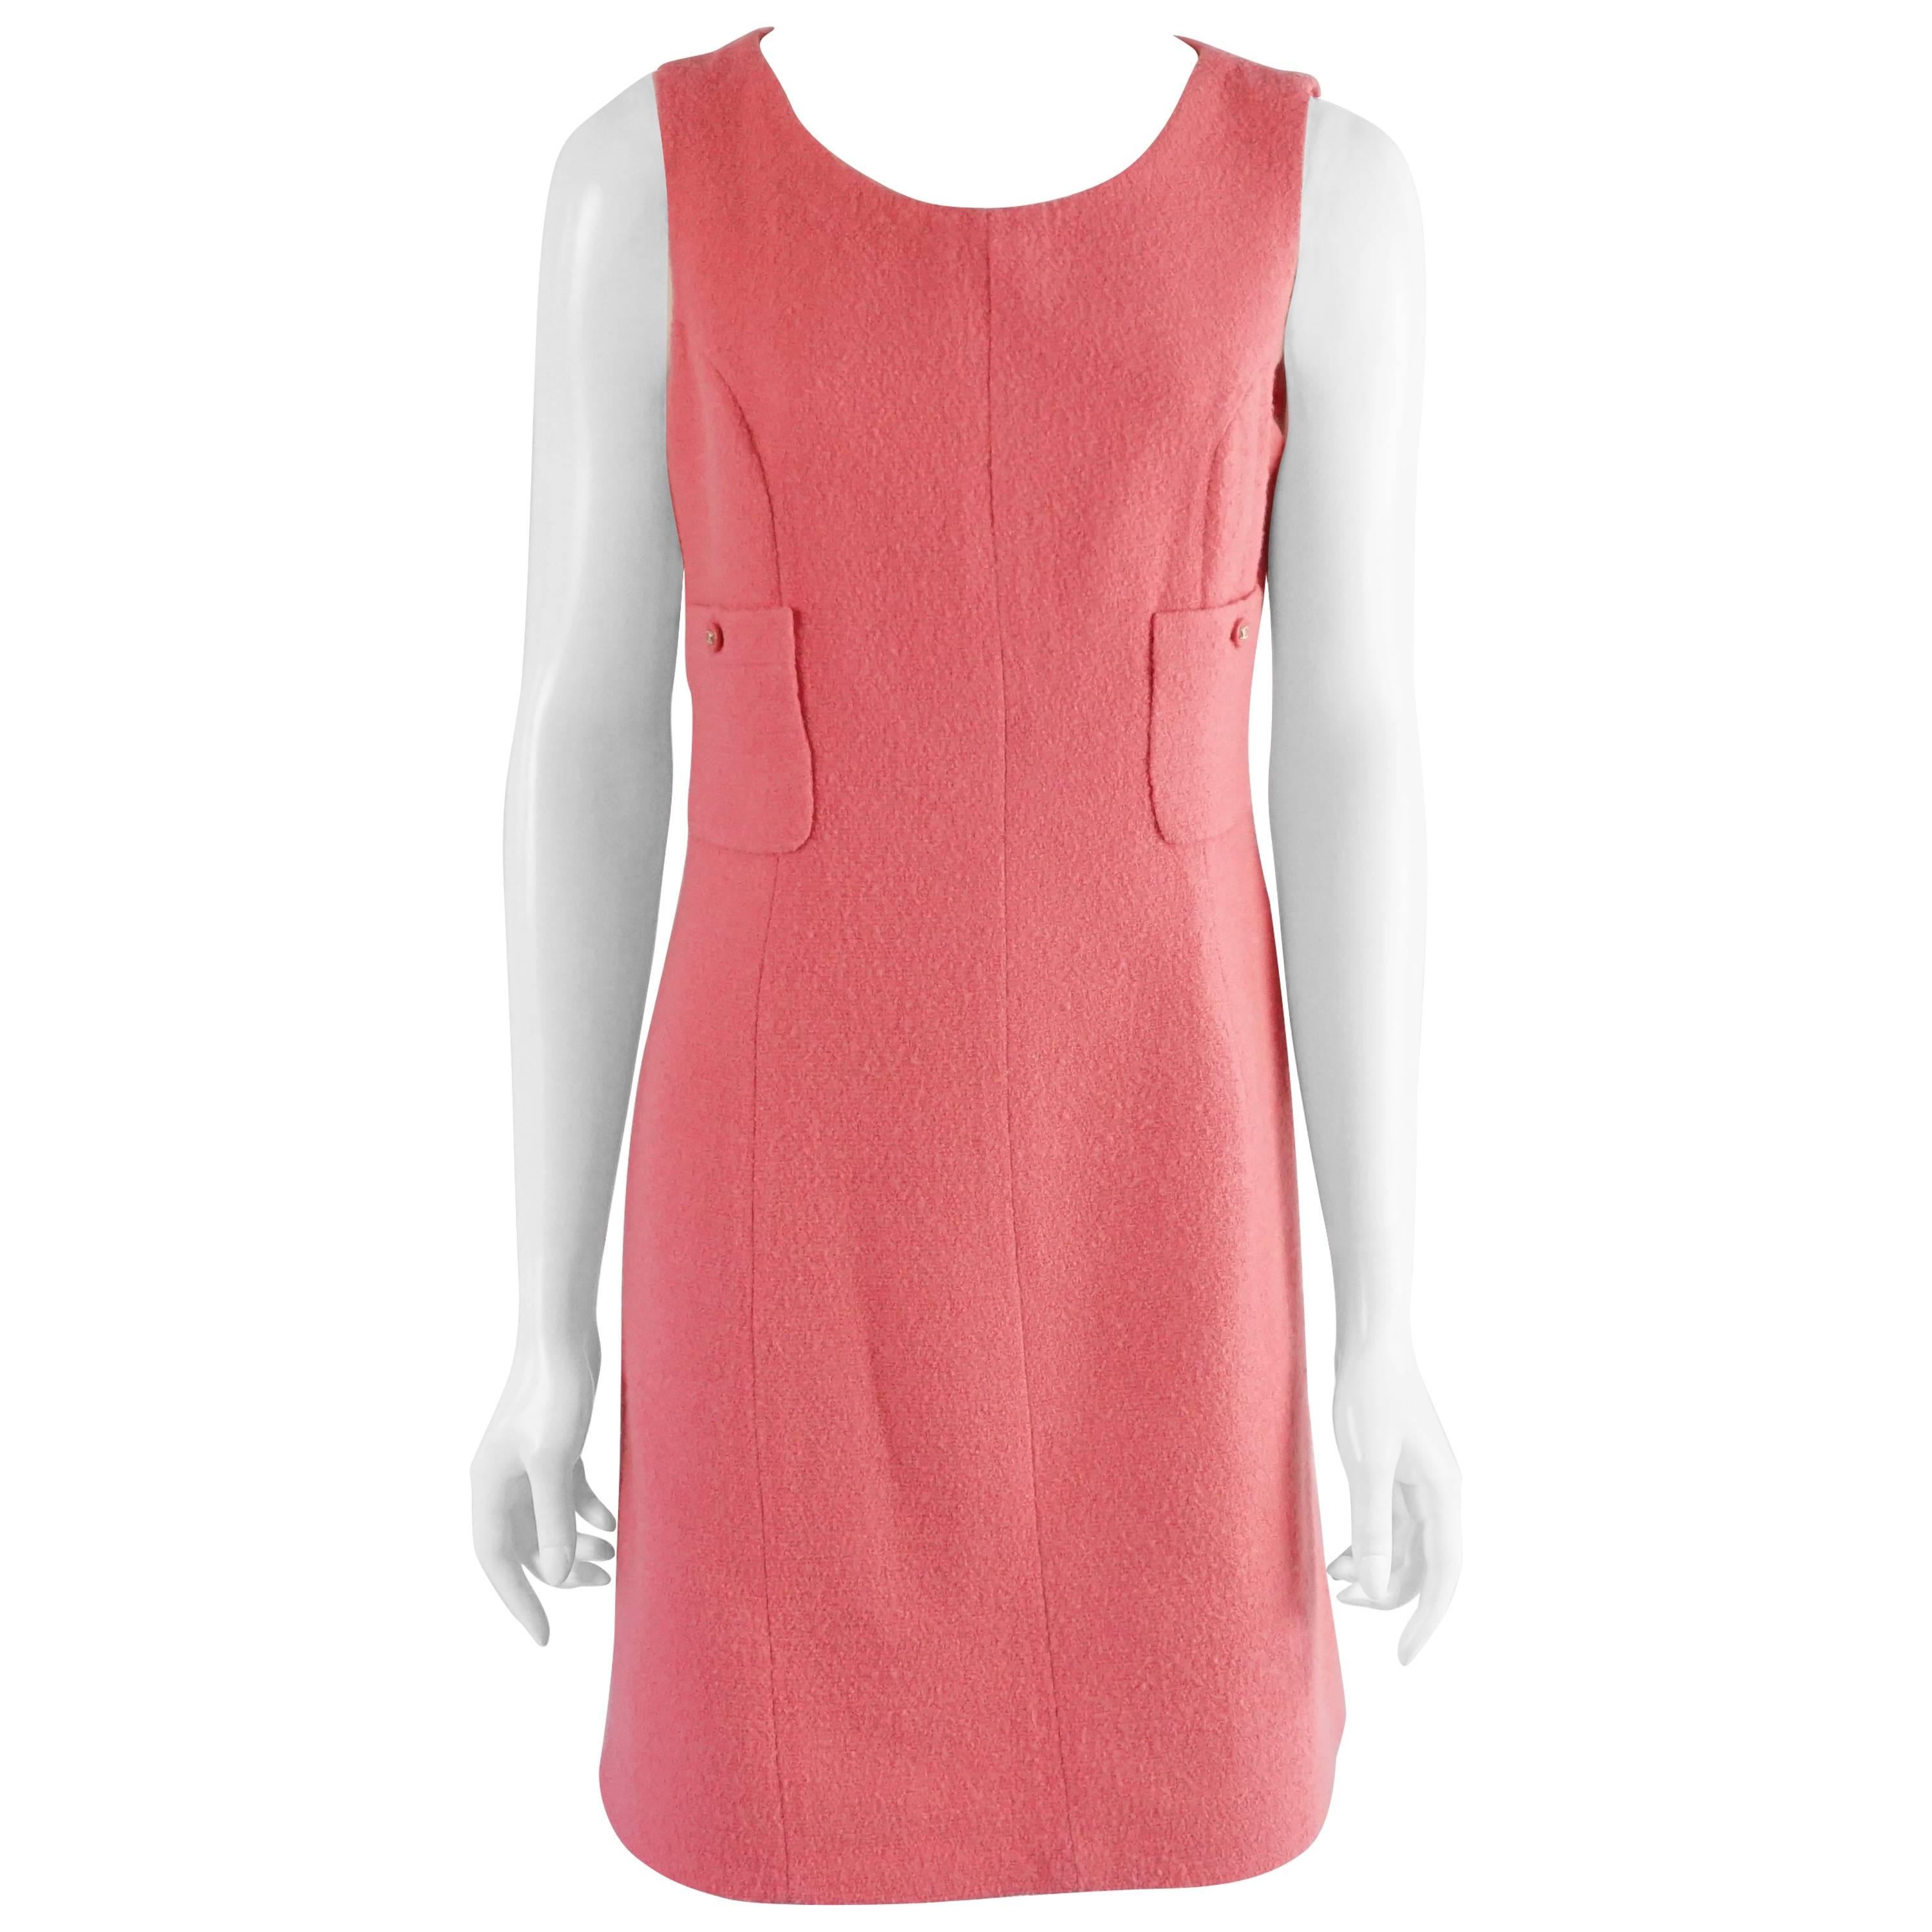 Chanel Pink Wool Sleeveless Shift Dress with Pockets – 8 - 1980's